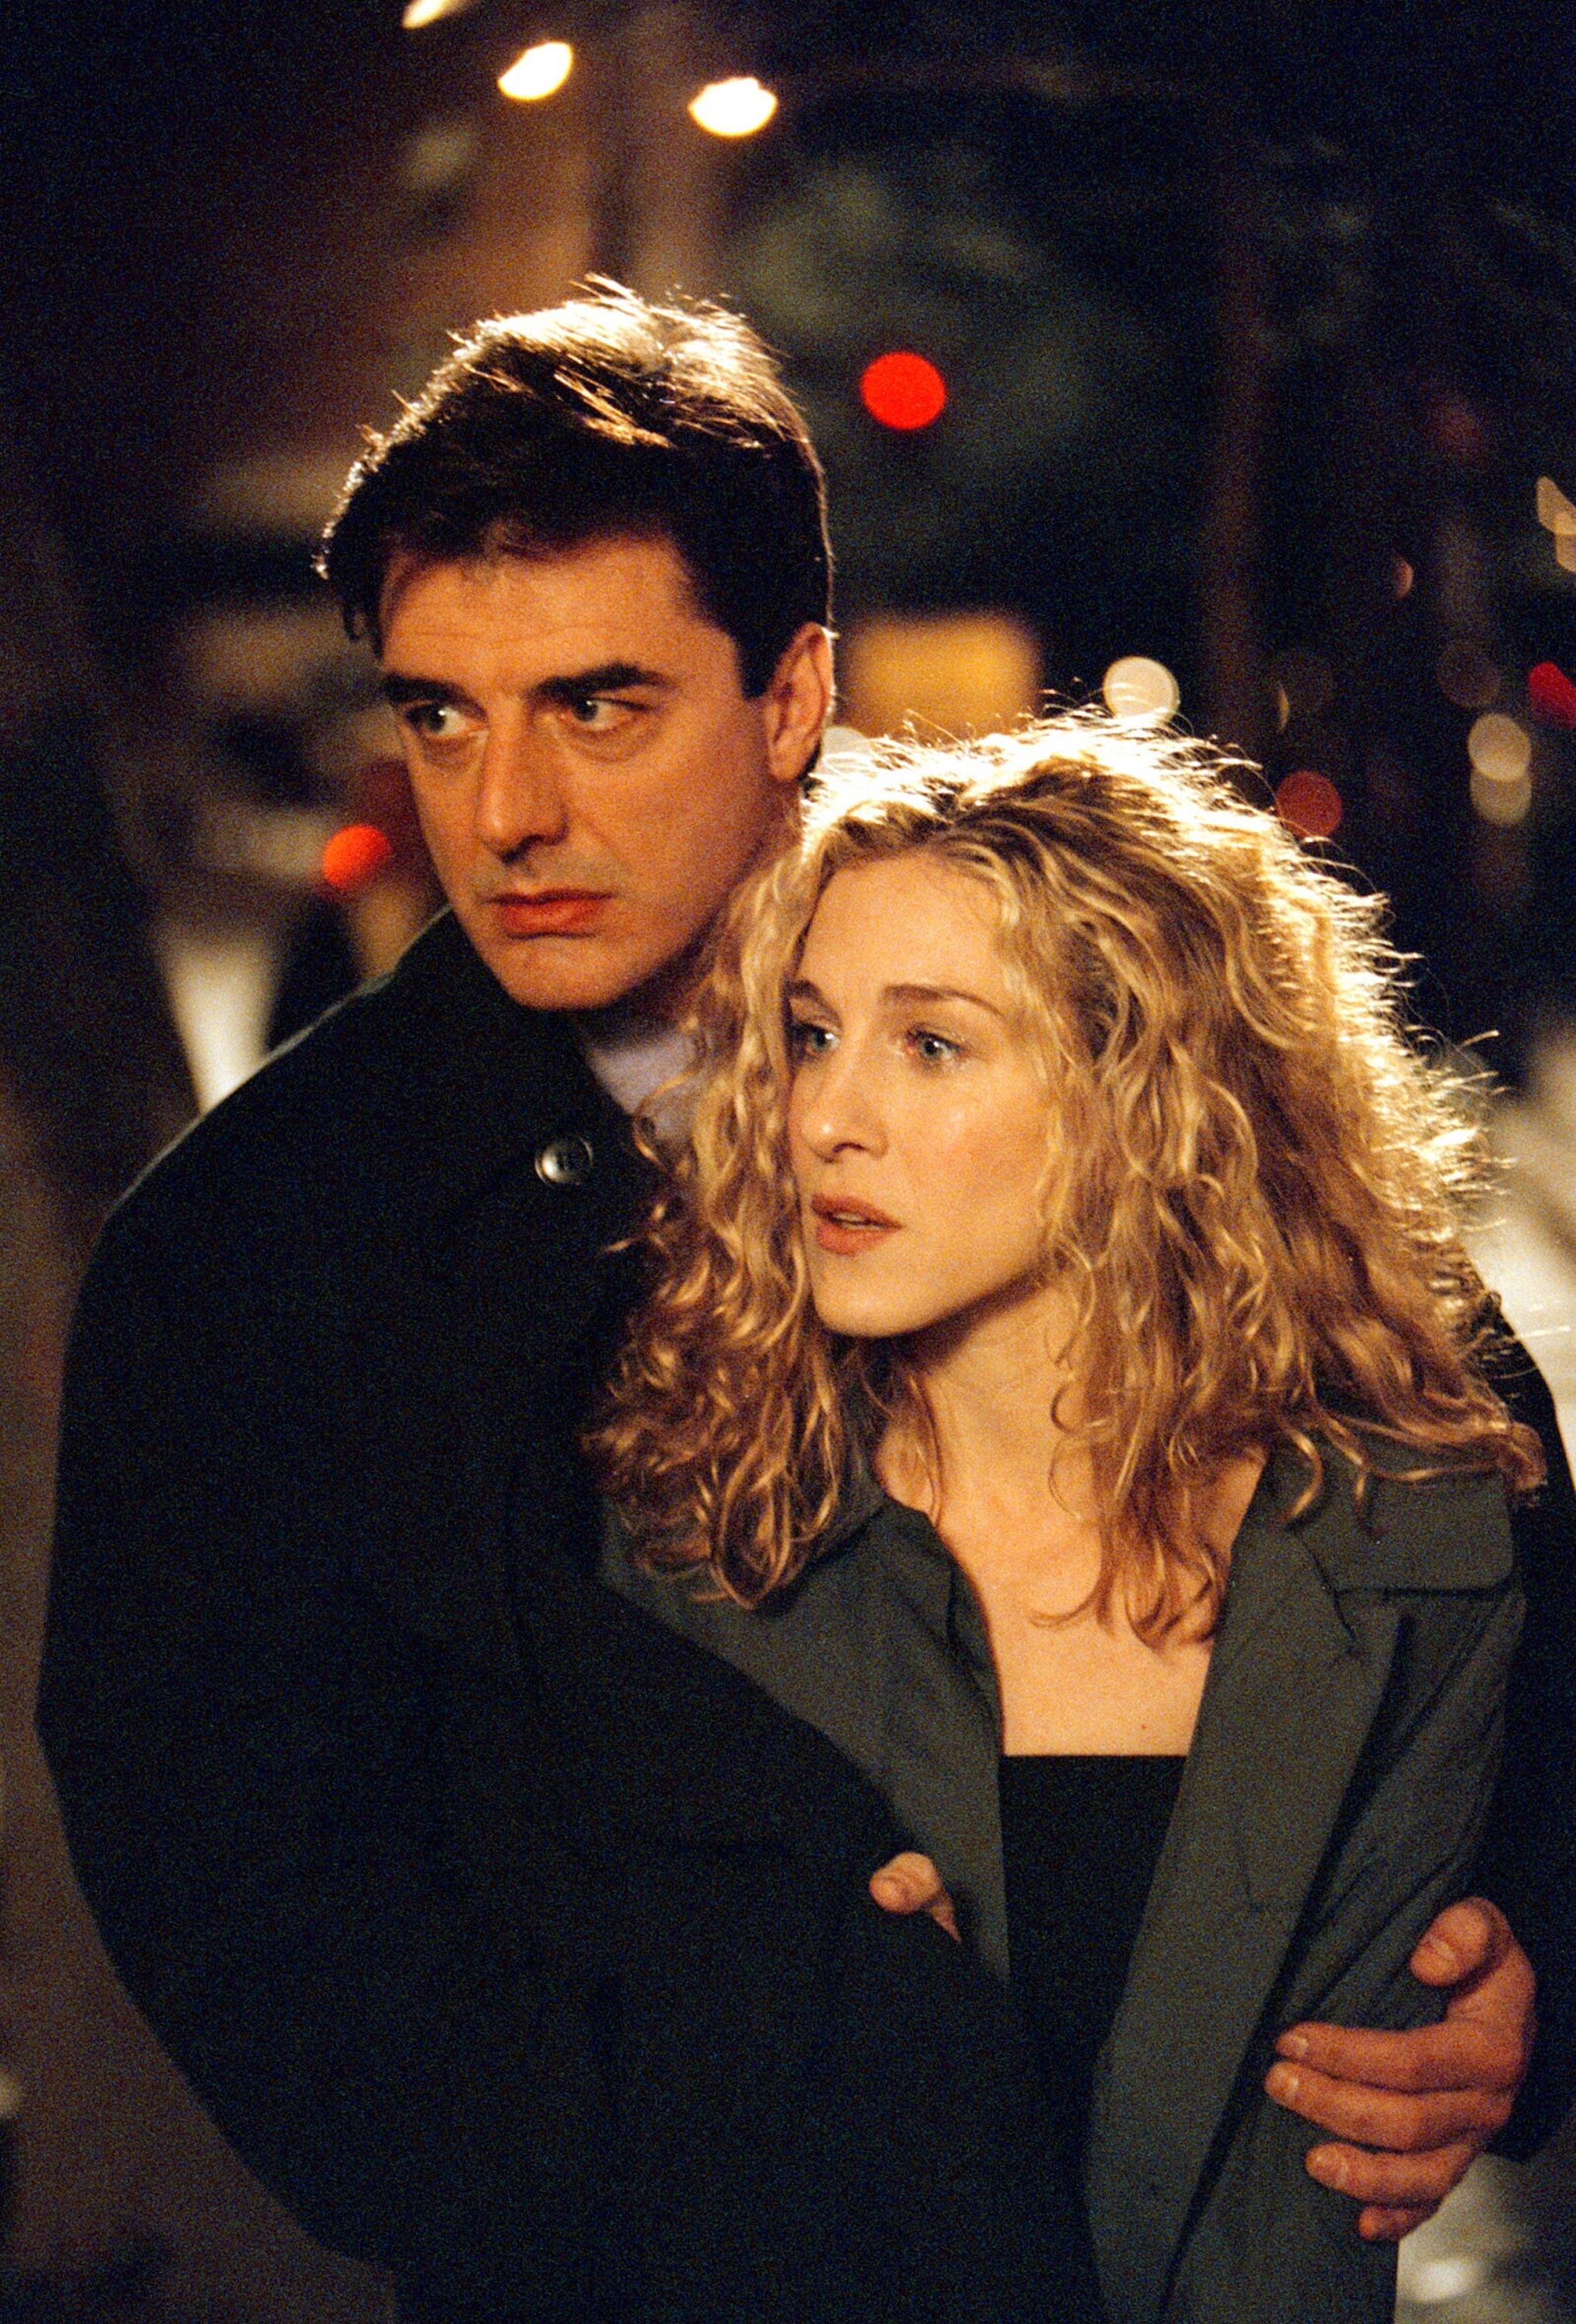 Actors Sarah Jessica Parker and Chris Noth on the set of "Sex and the City" (HBO/Getty Images)